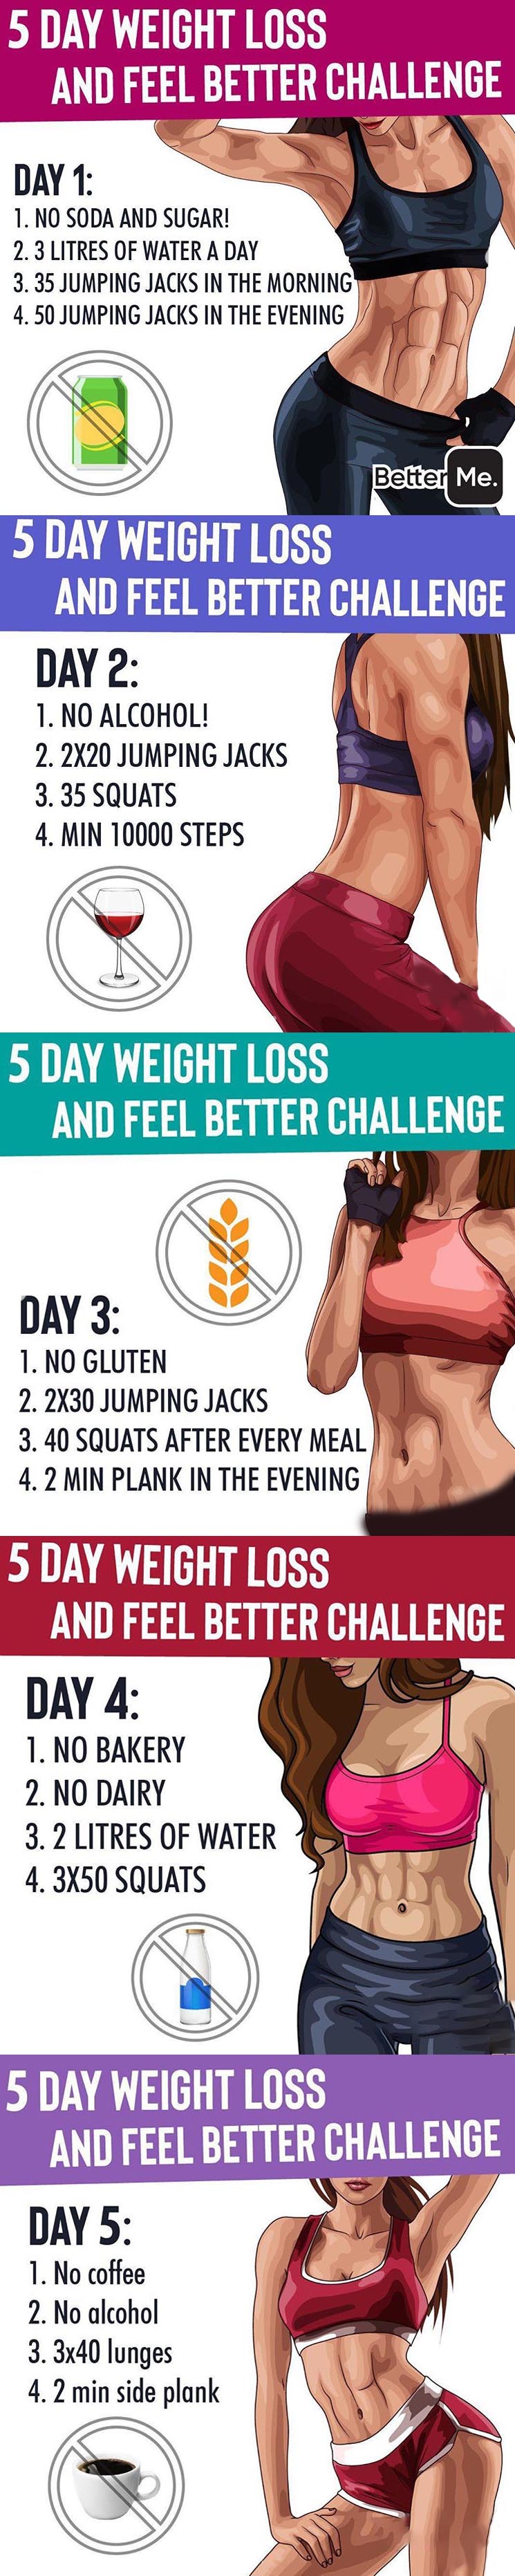 Weight Loss and Feel Better Challenge